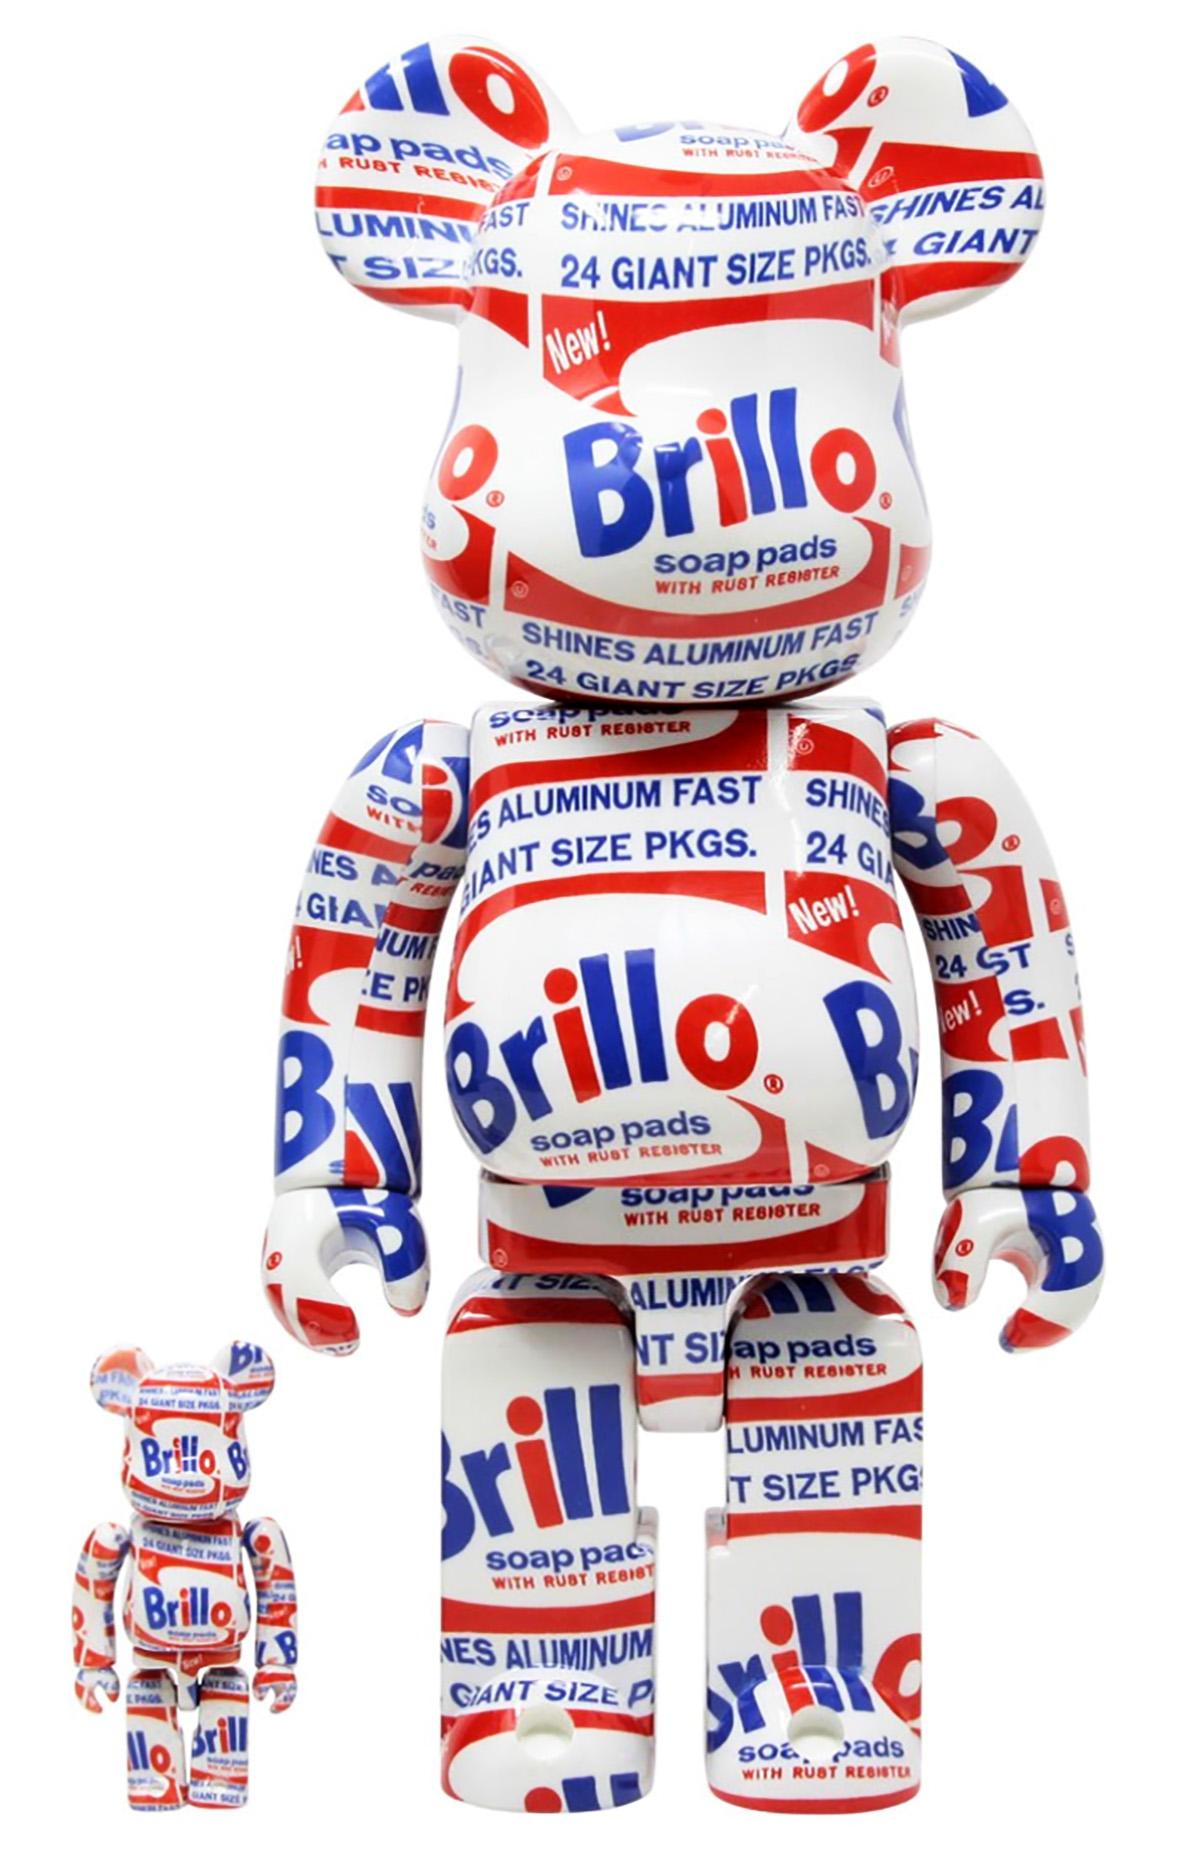 Be@rbrick x Andy Warhol Foundation "Brillo" Vinyl Figures: Set of two (400% & 100%): Andy Warhol (after) Brillo collectible trademarked & licensed by the Estate of Andy Warhol. The partnered collectible reveals Warhol‘s iconic 60s imagery wrapping